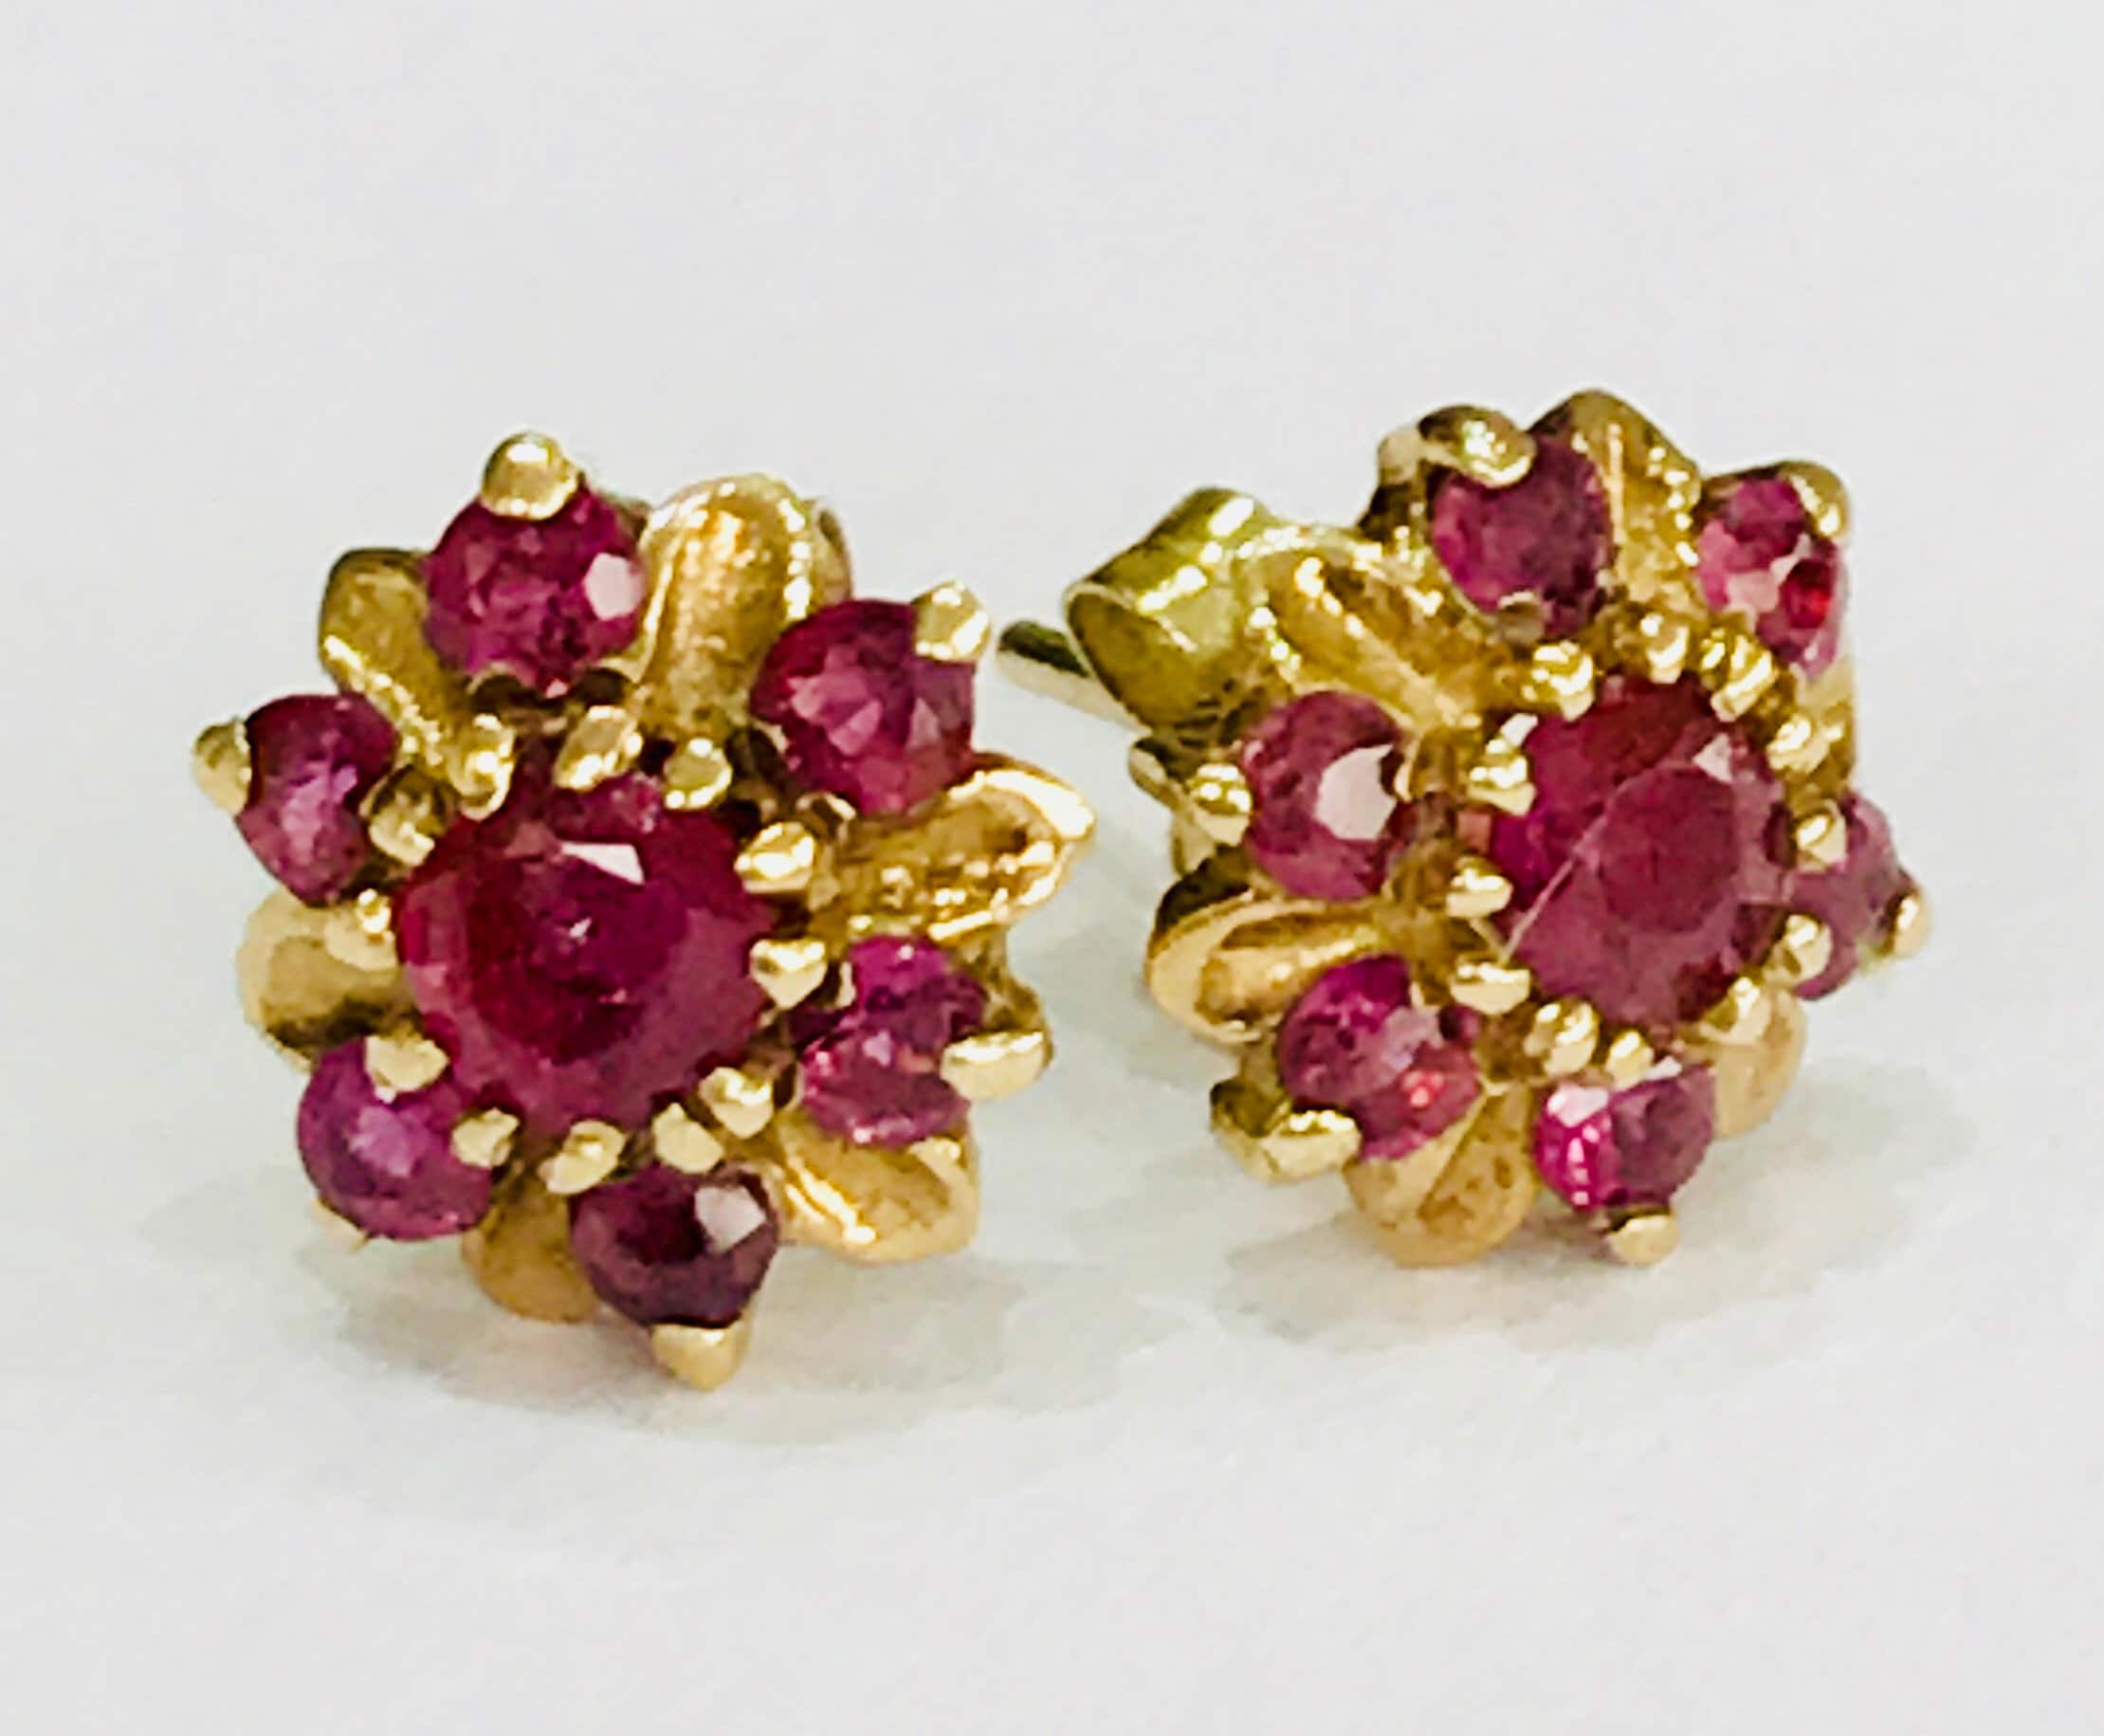 Fabulous vintage 9ct yellow gold natural Ruby stud earrings